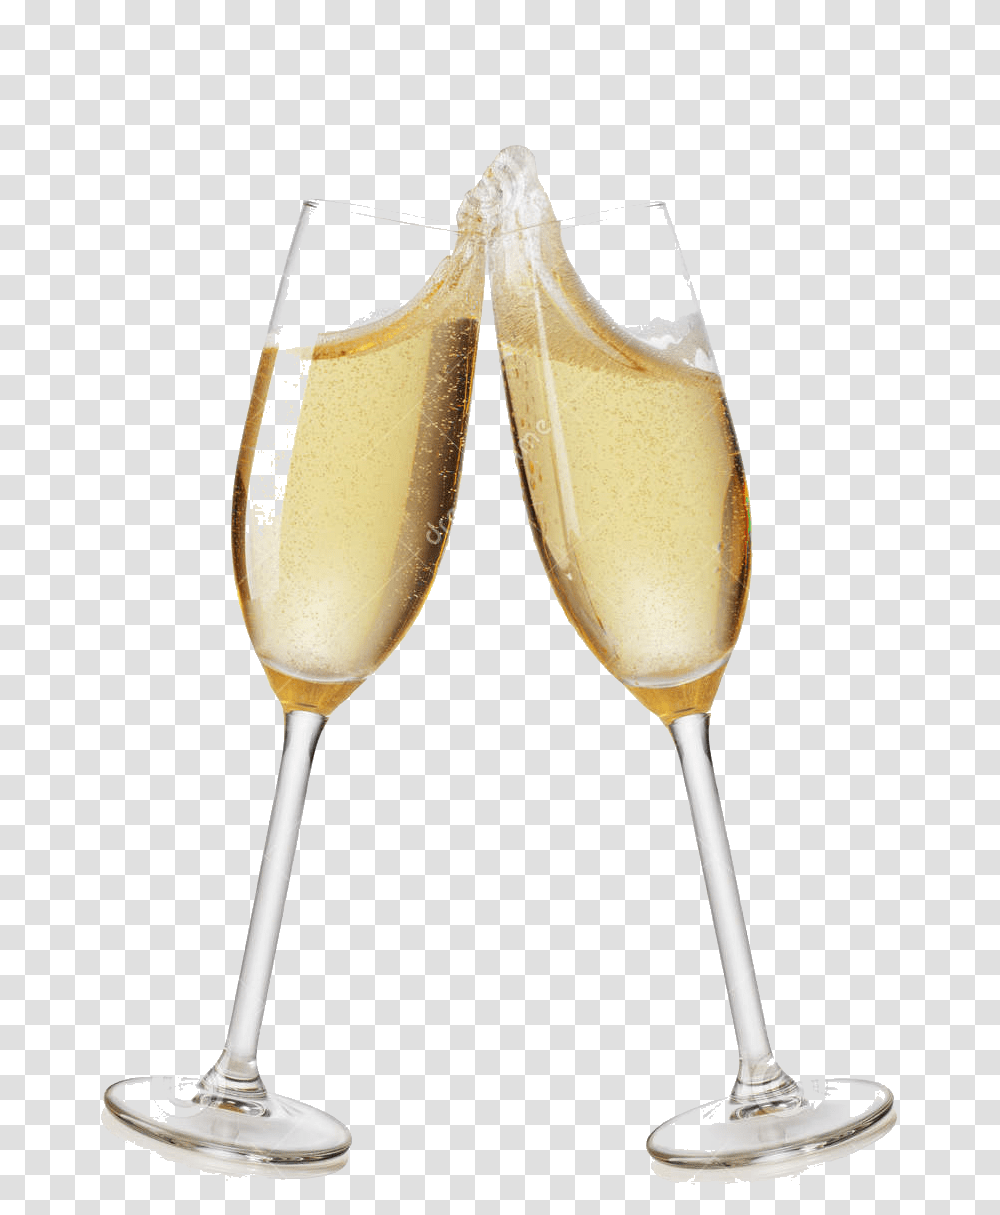 Zz Champagne Flutes On The Town Limousines, Glass, Wine Glass, Alcohol, Beverage Transparent Png